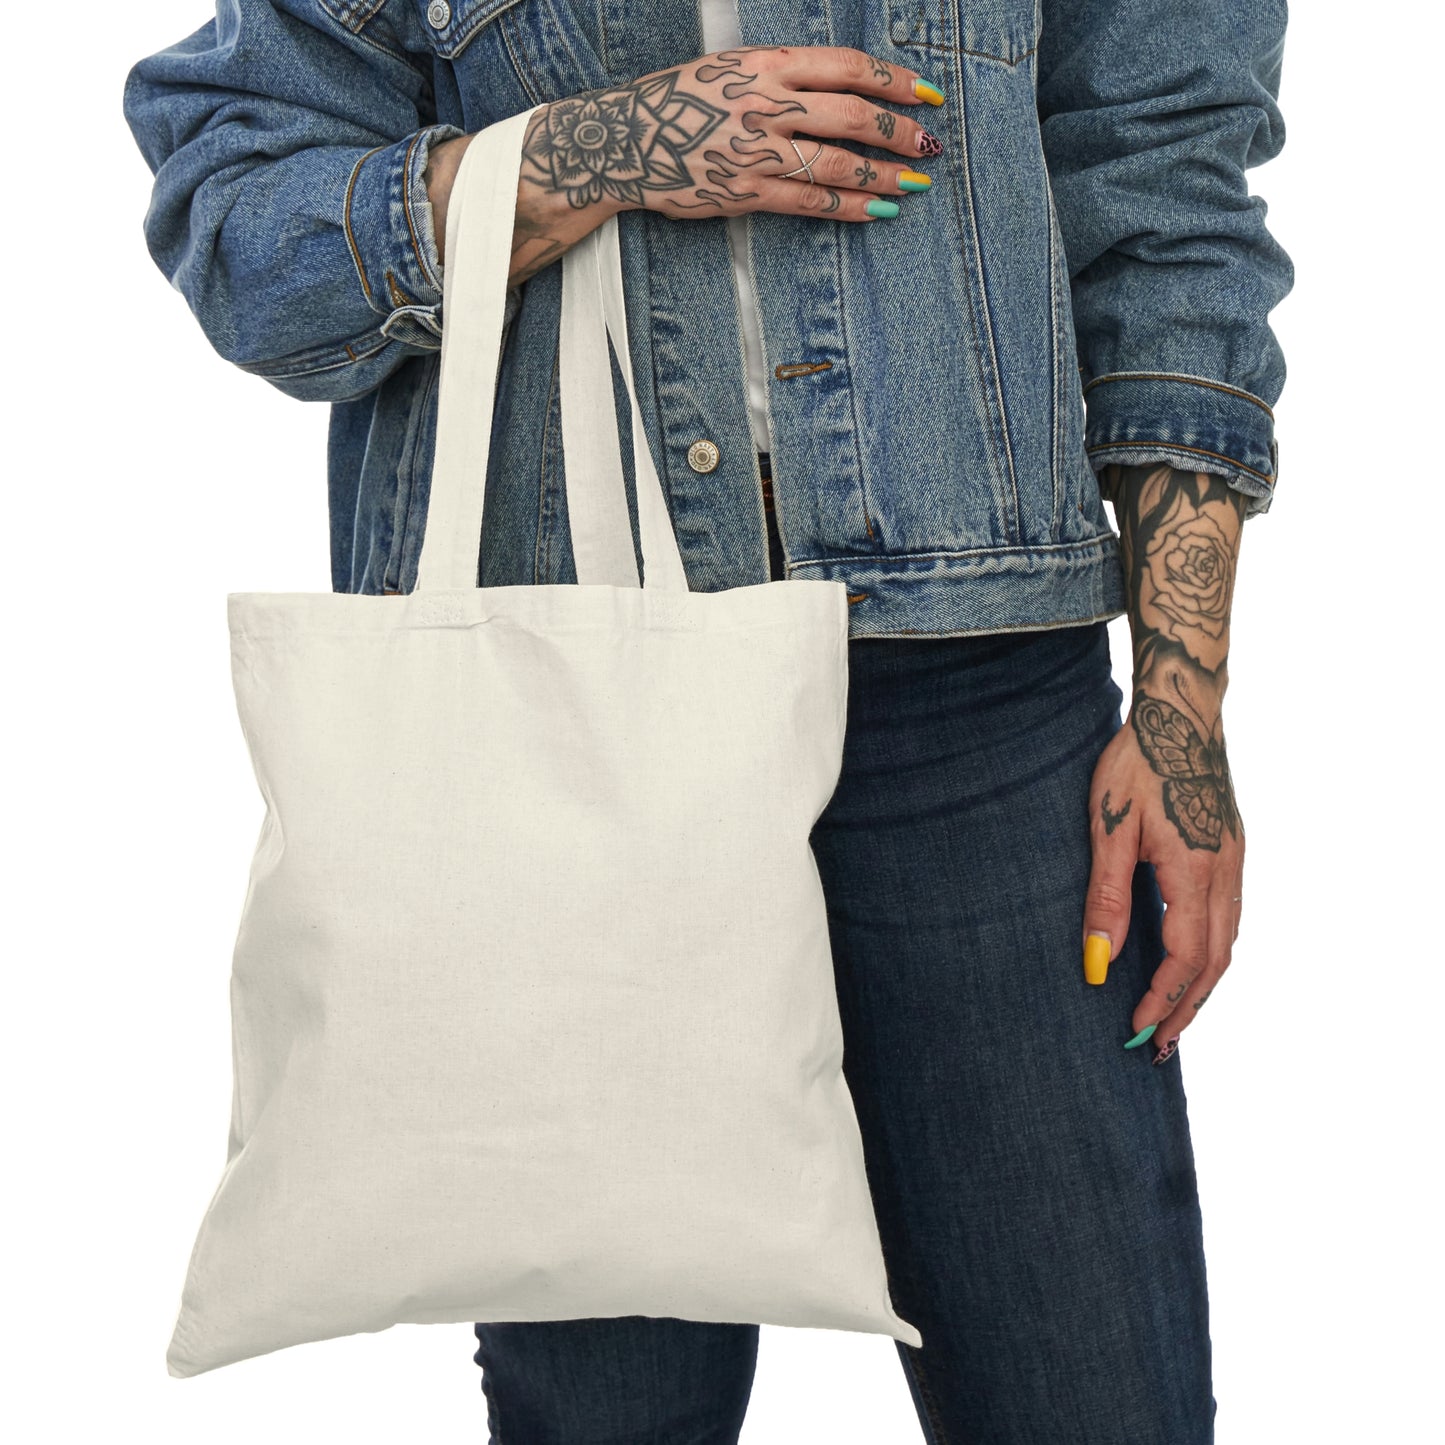 Trials Of Impending Night - Natural Tote Bag